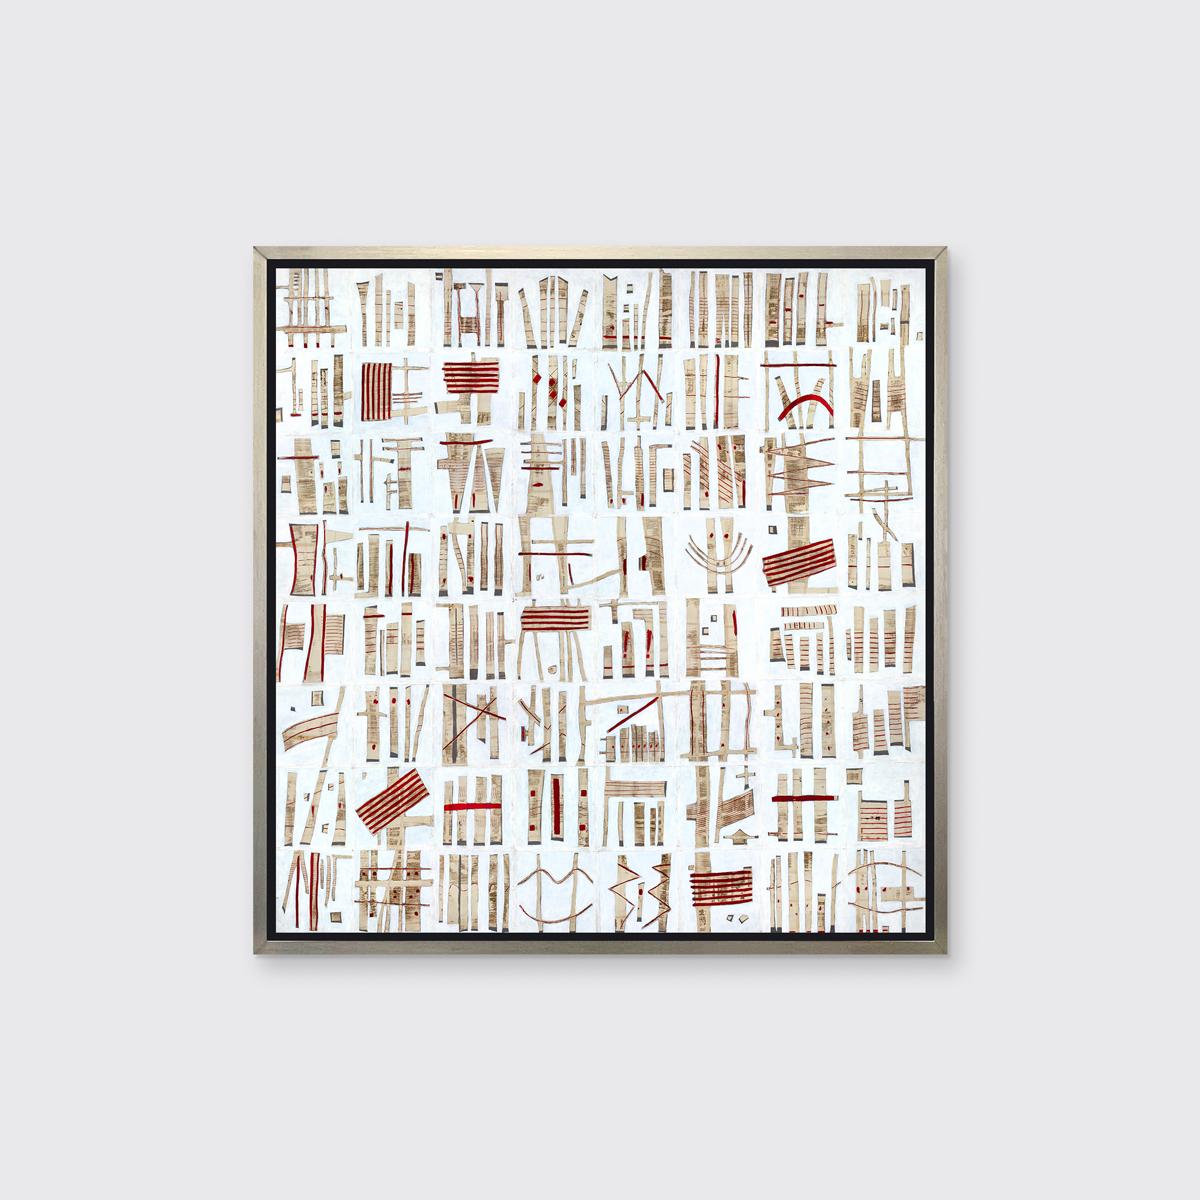 Sofie Swann Abstract Print - "Bedtime Story, " Framed Limited Edition Giclee Print, 53" x 53"